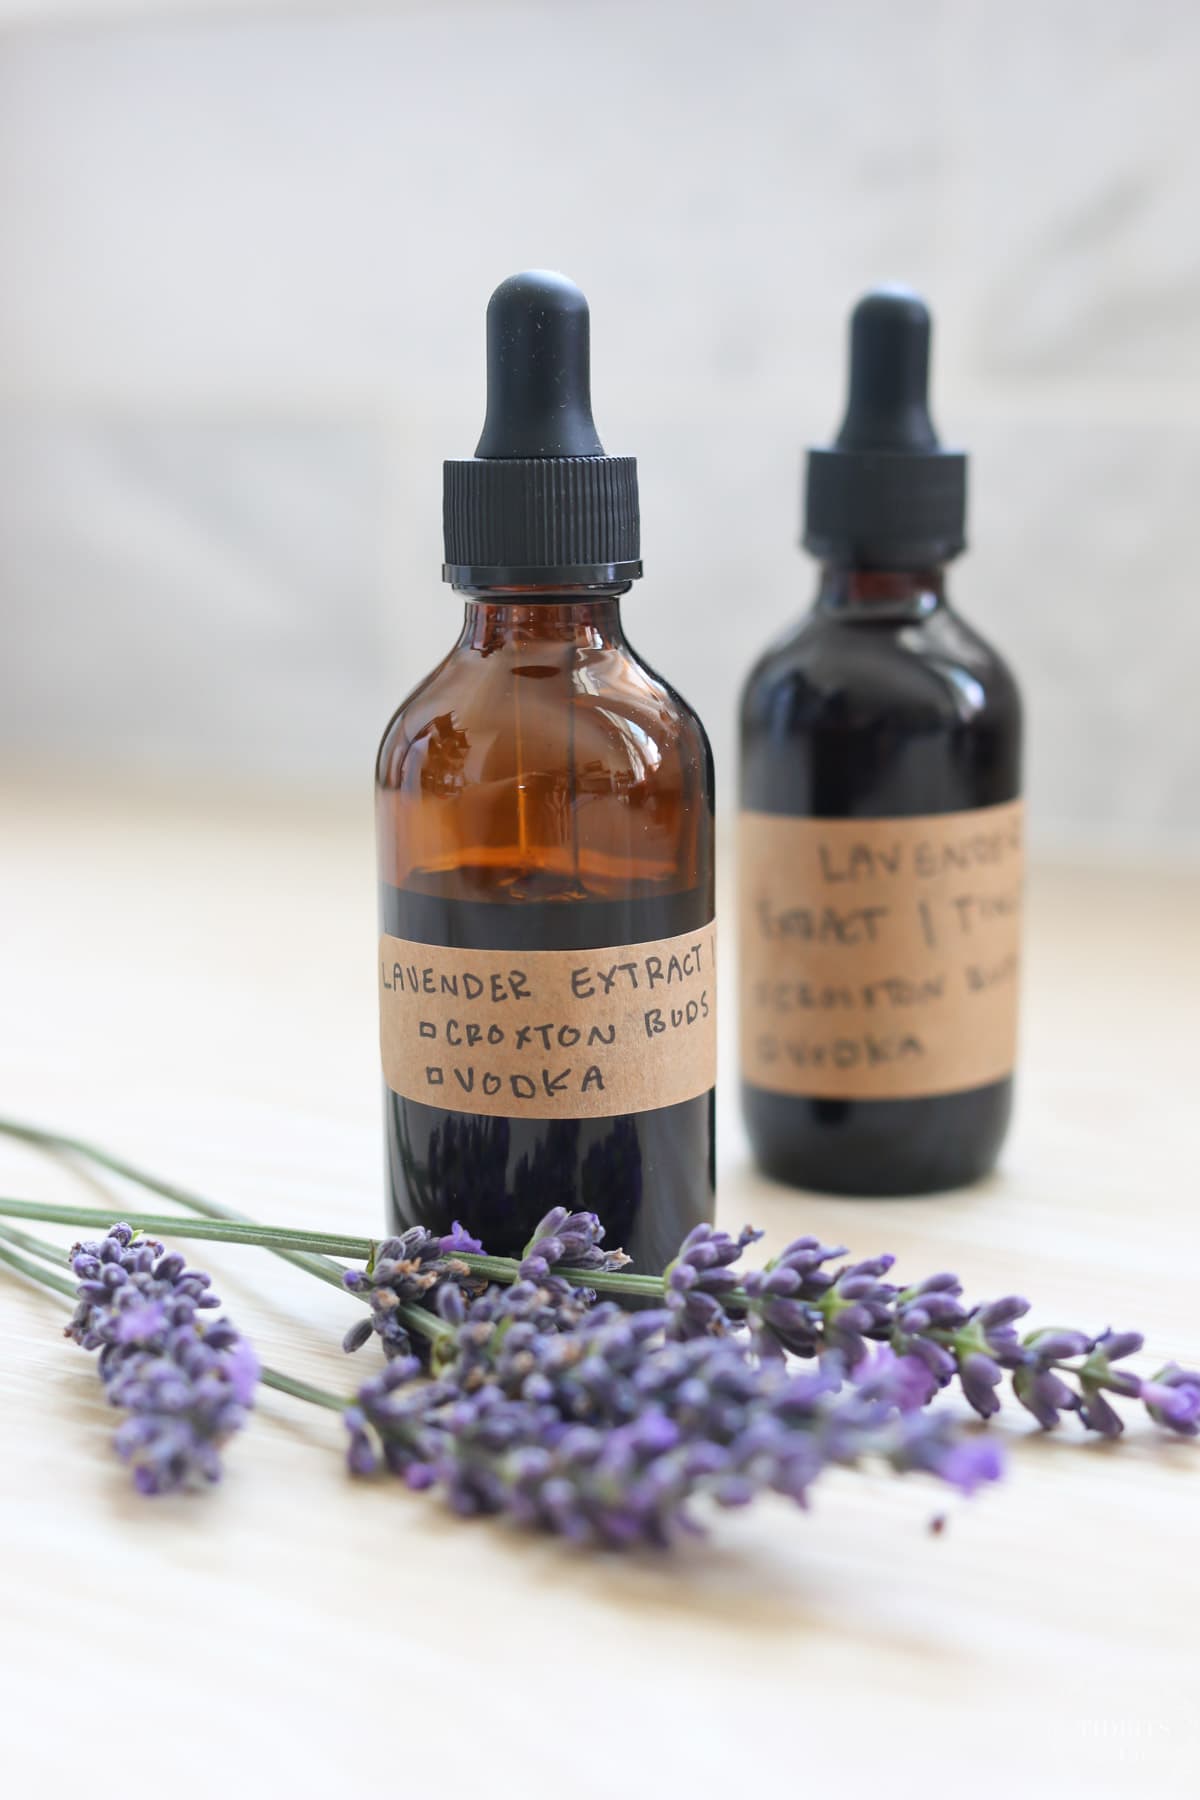 Lavender extract and lavender tincture in brown glass bottles